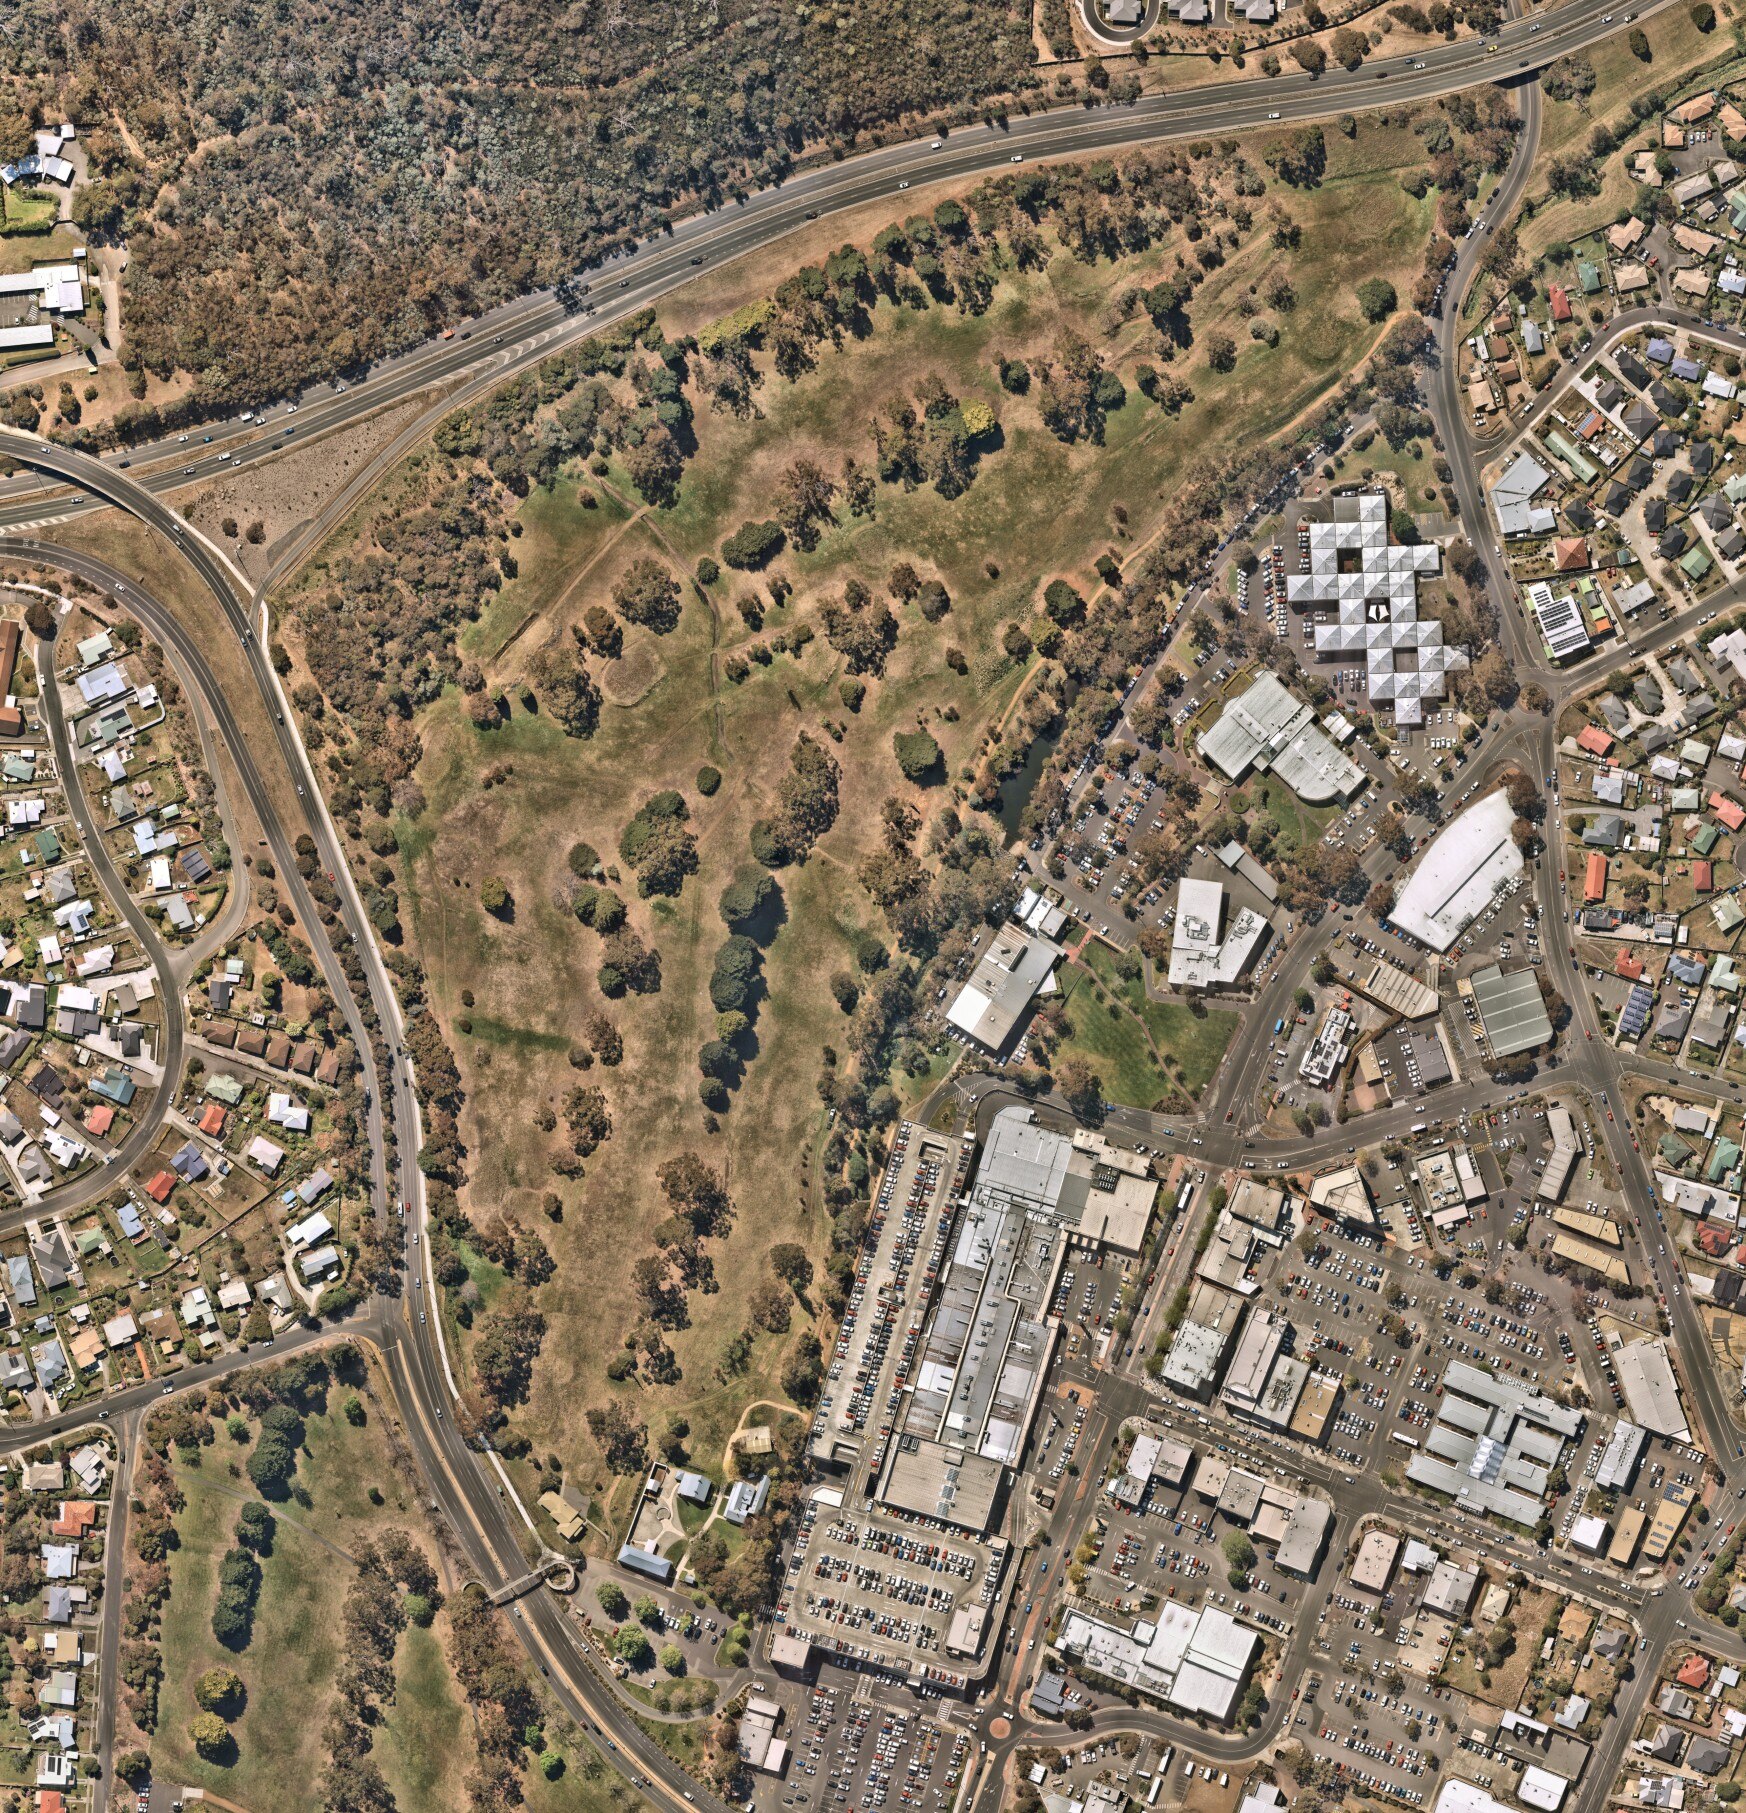 A satellite view of the Rosny Parklands.